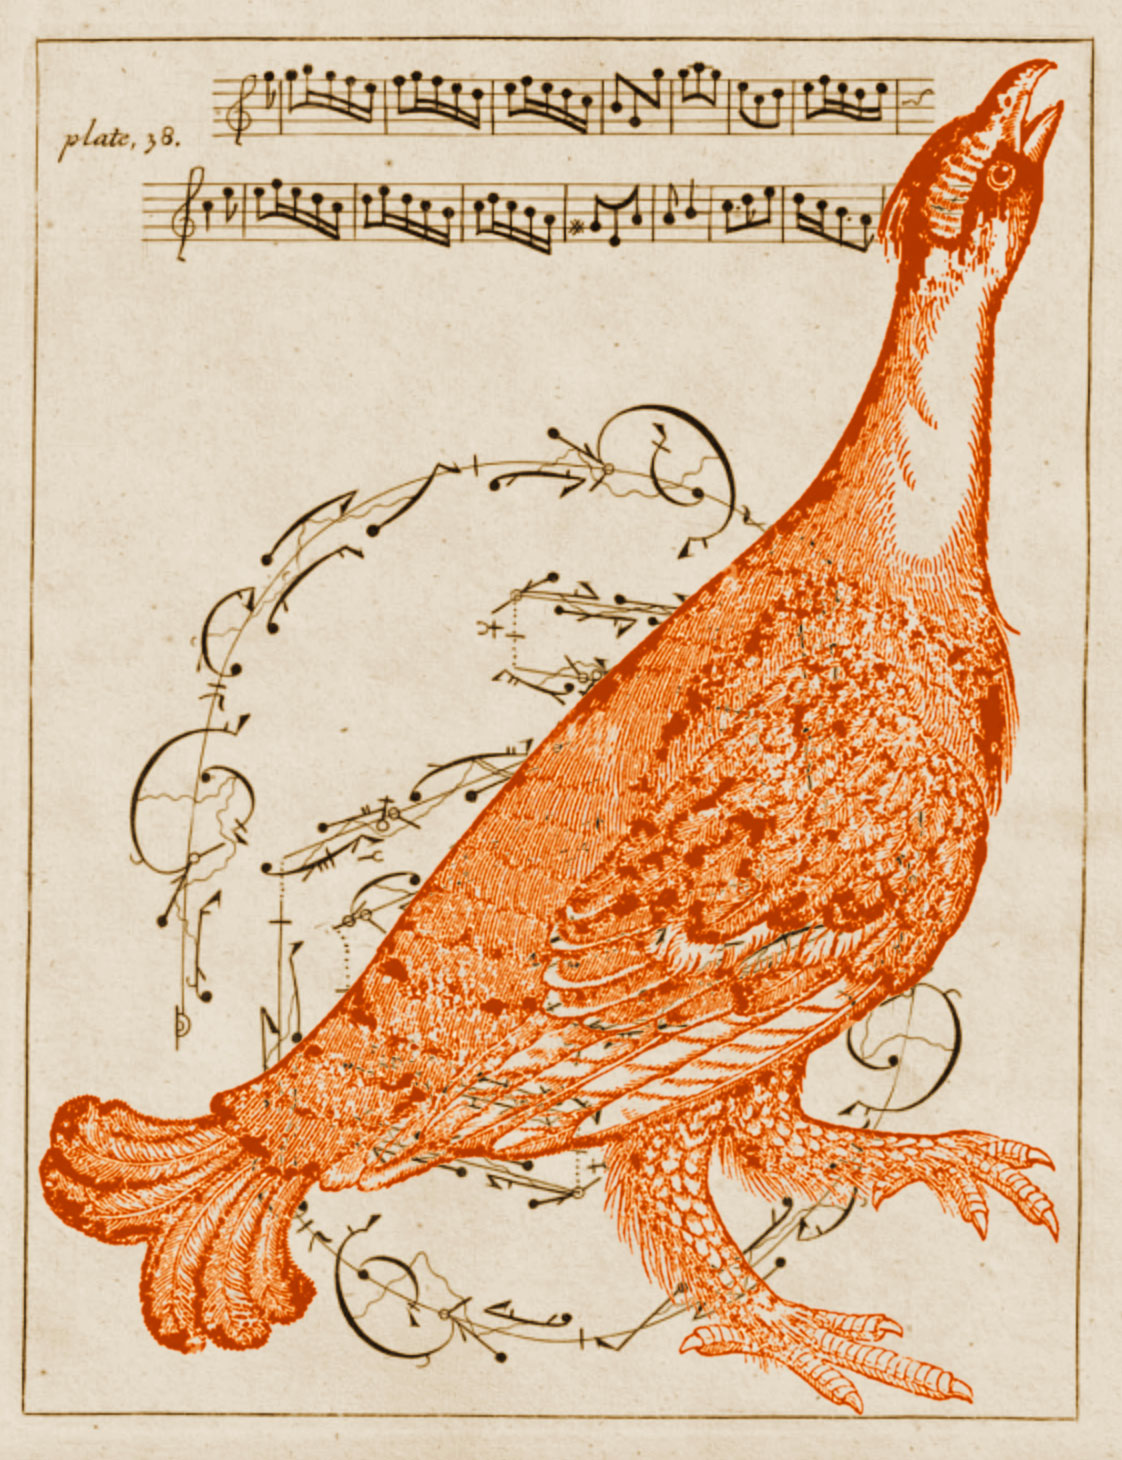 An illustration depicting a bird screen-printed over musical notation